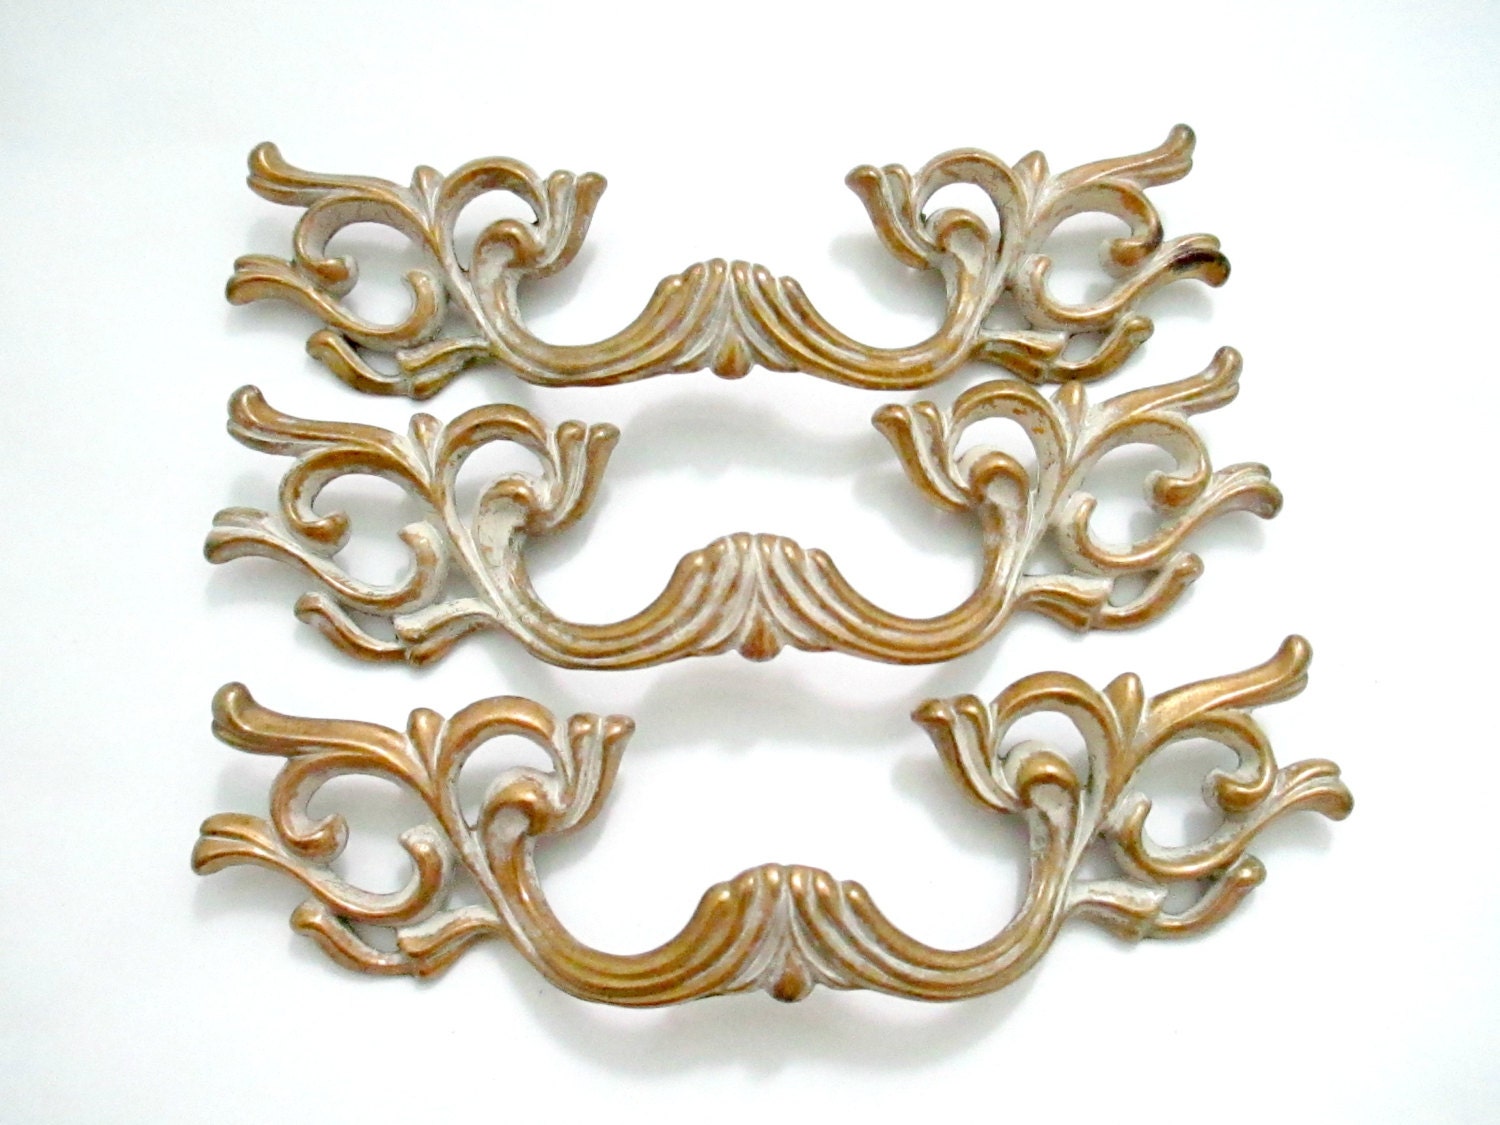 3 Vintage French Provincial drawer pulls 2 3/4 by Fairyhome